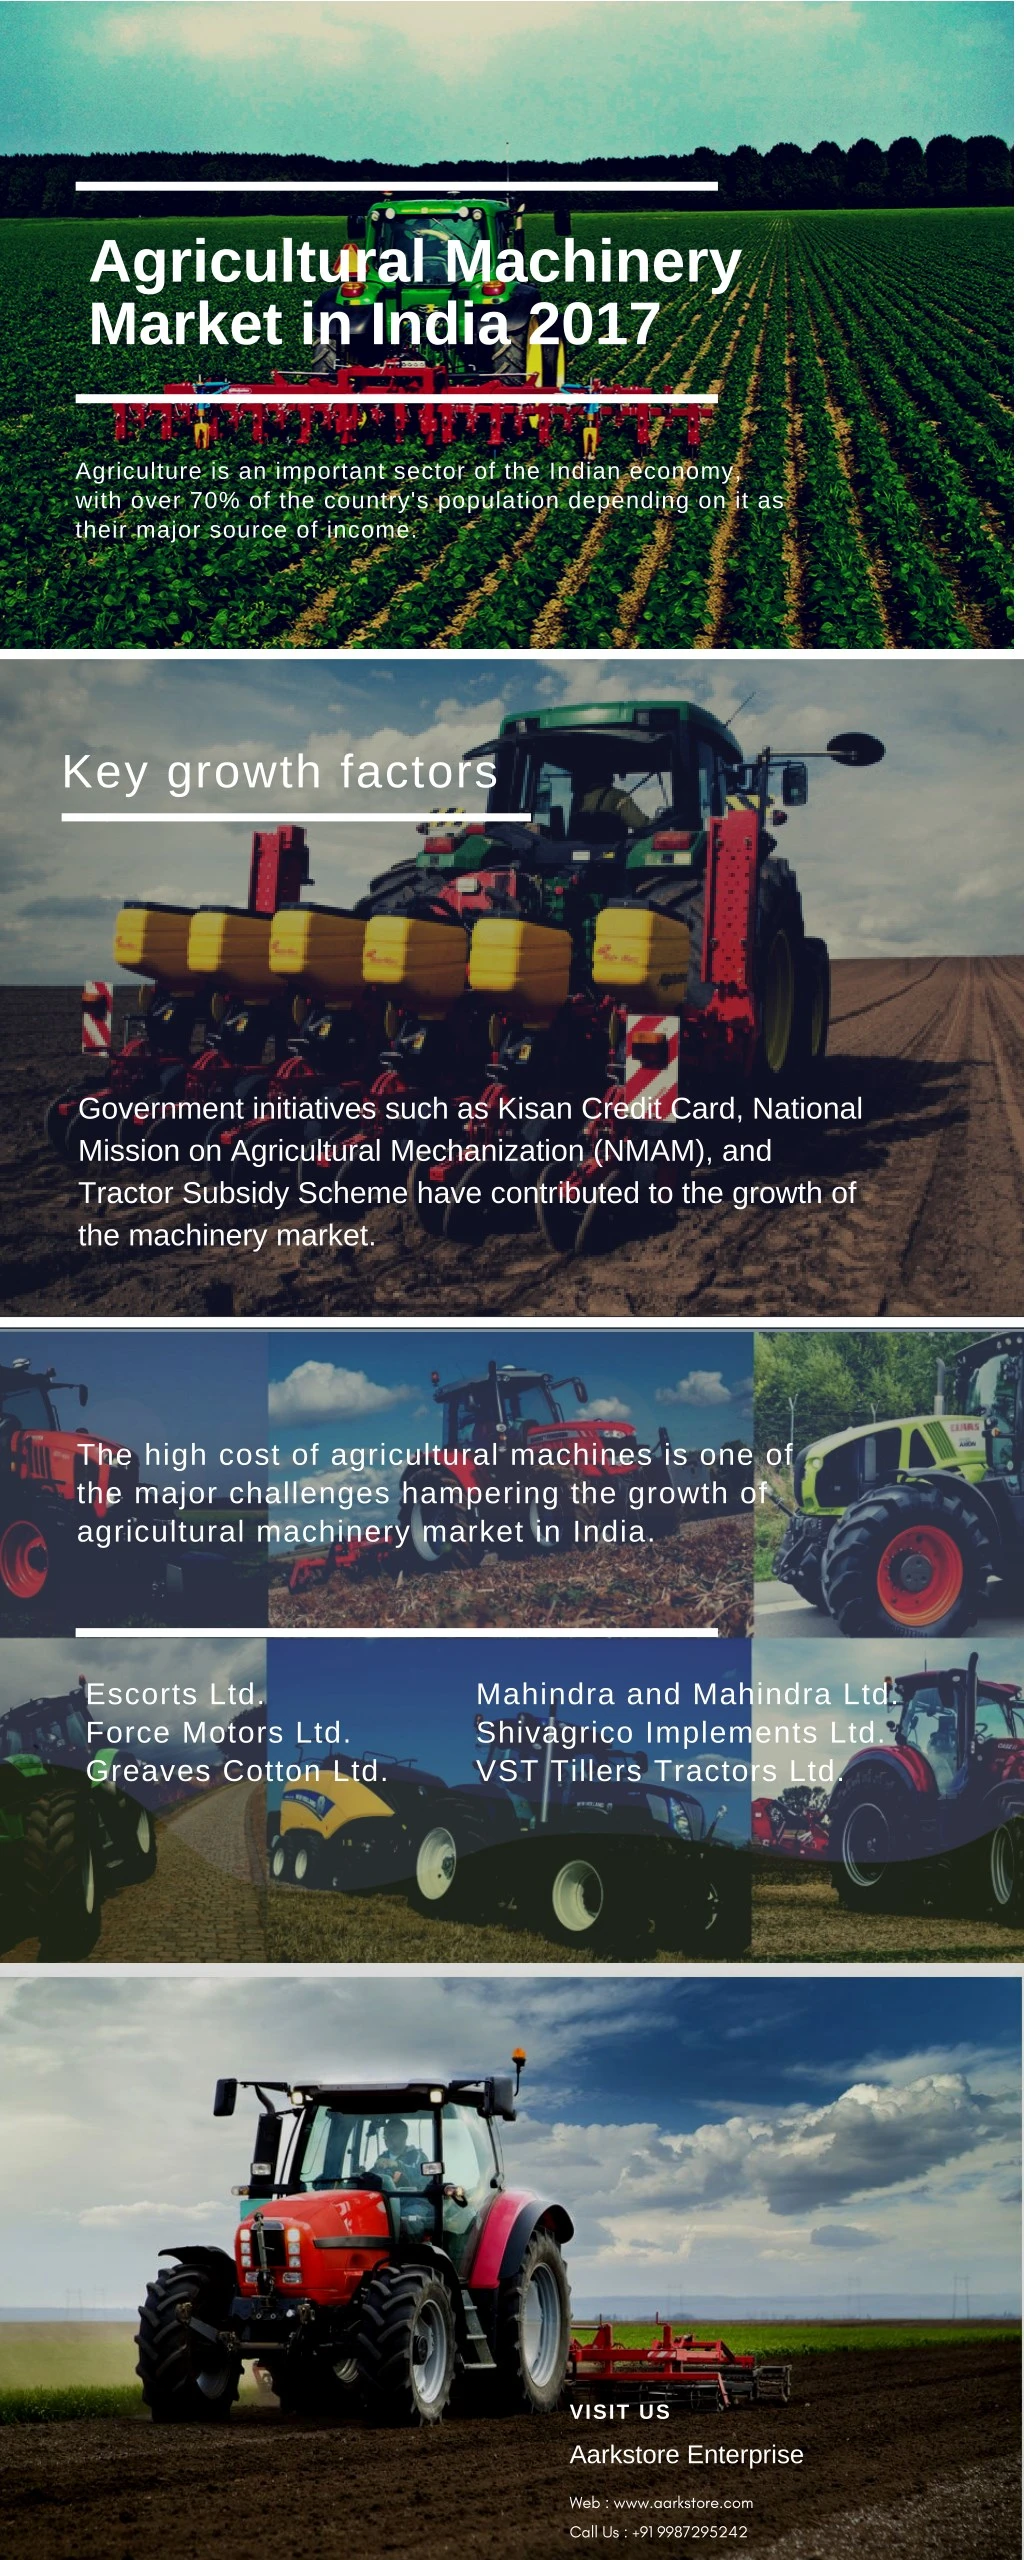 agricultural machinery market in india 2017